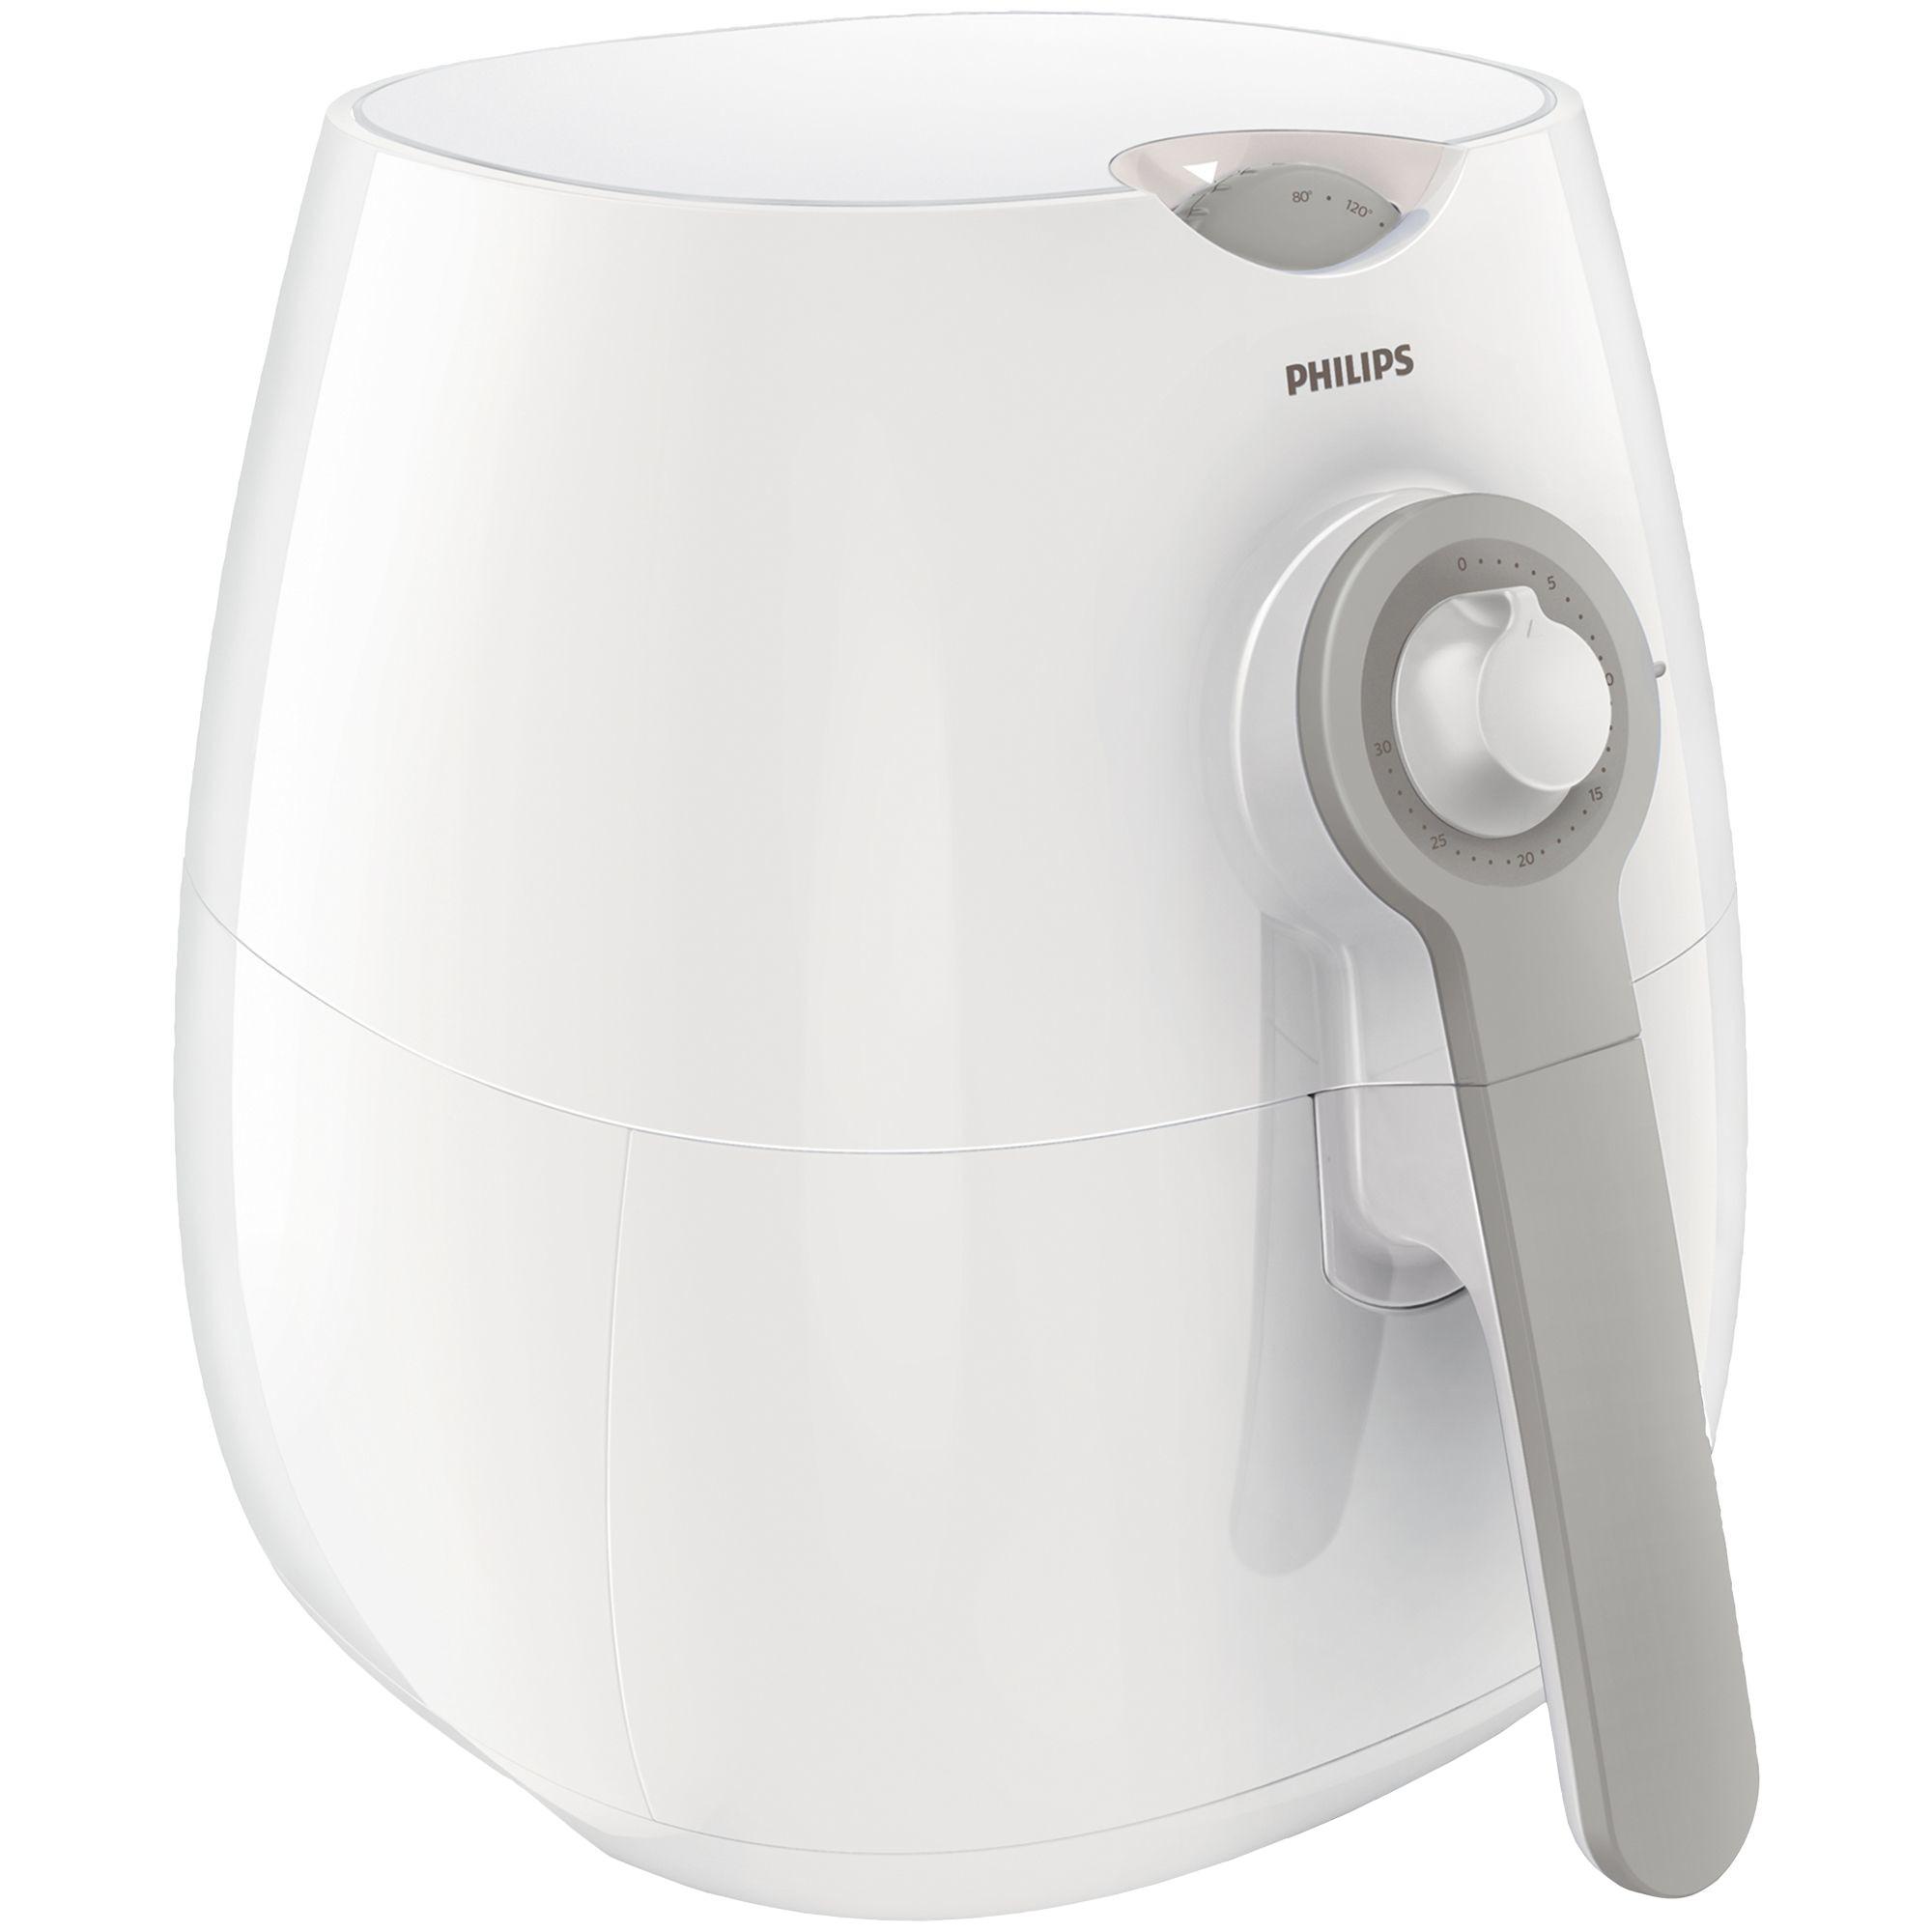  Friteuza fara grasimi Philips Daily Collection Airfryer HD9216/80, 1425 W, 0.8 kg 